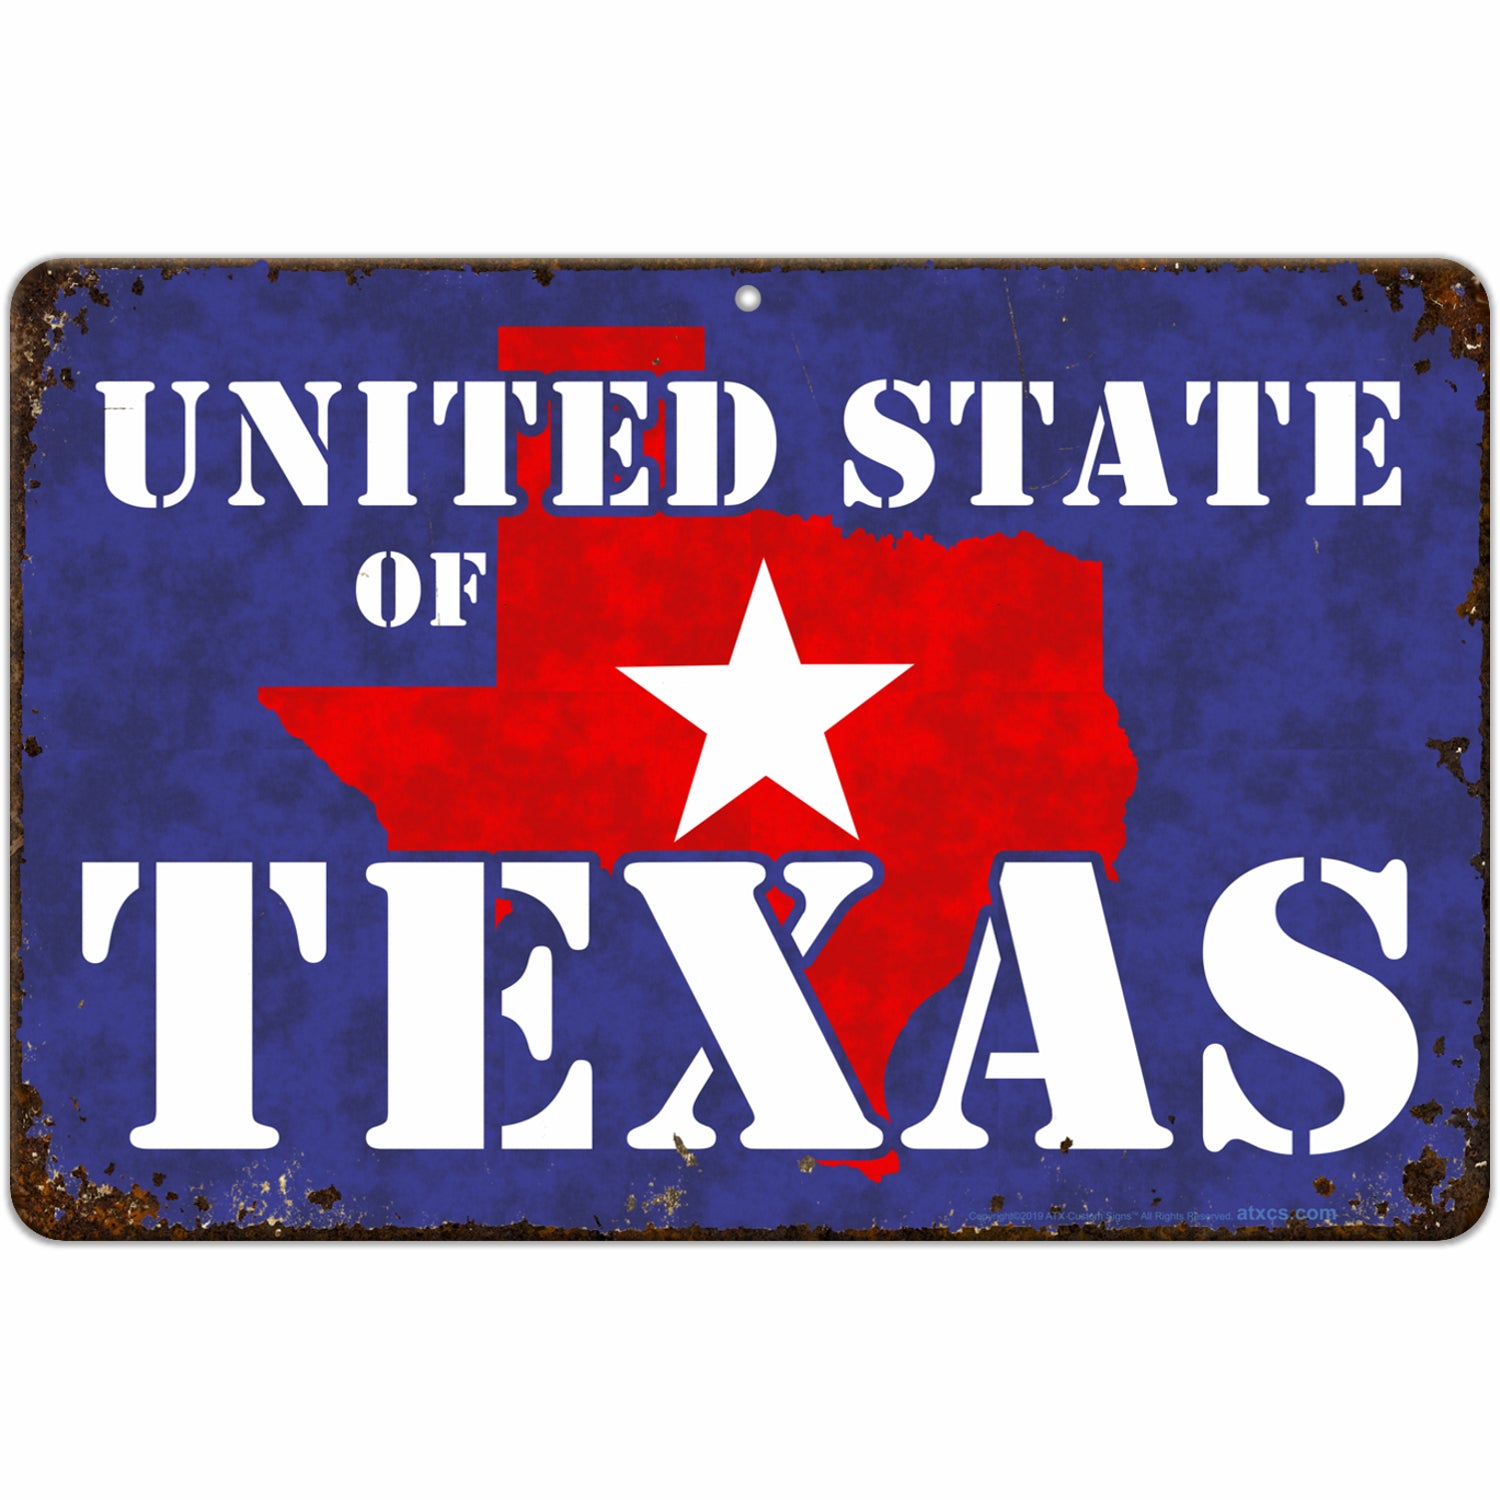 United State of Texas (Antique Looking)